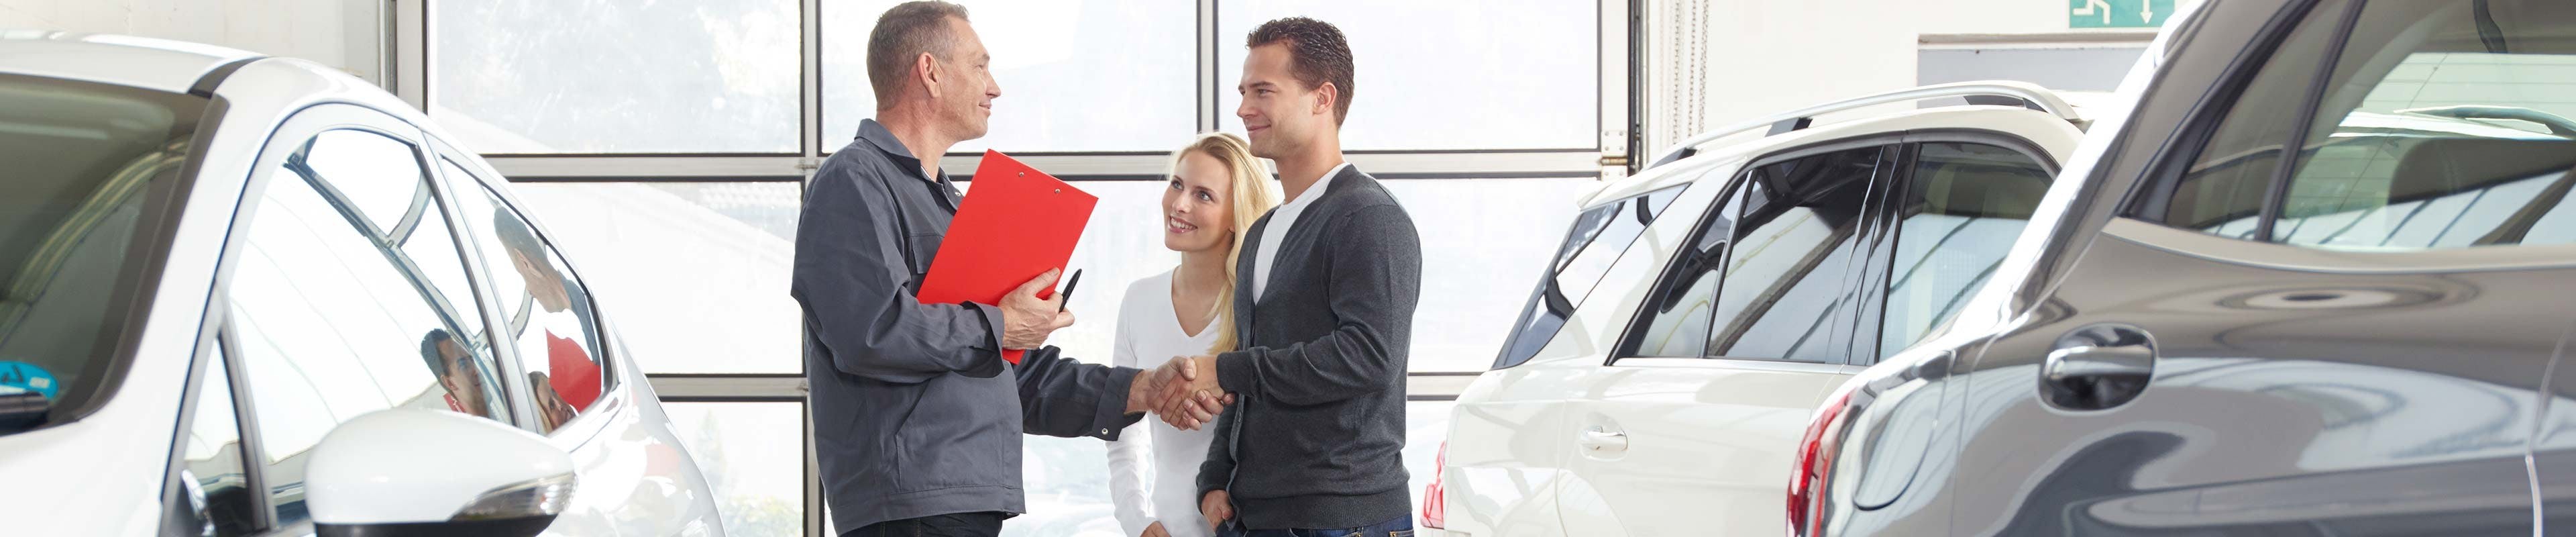 Image of a young couple working on the purchase of a car at a dealership with a car salesman.